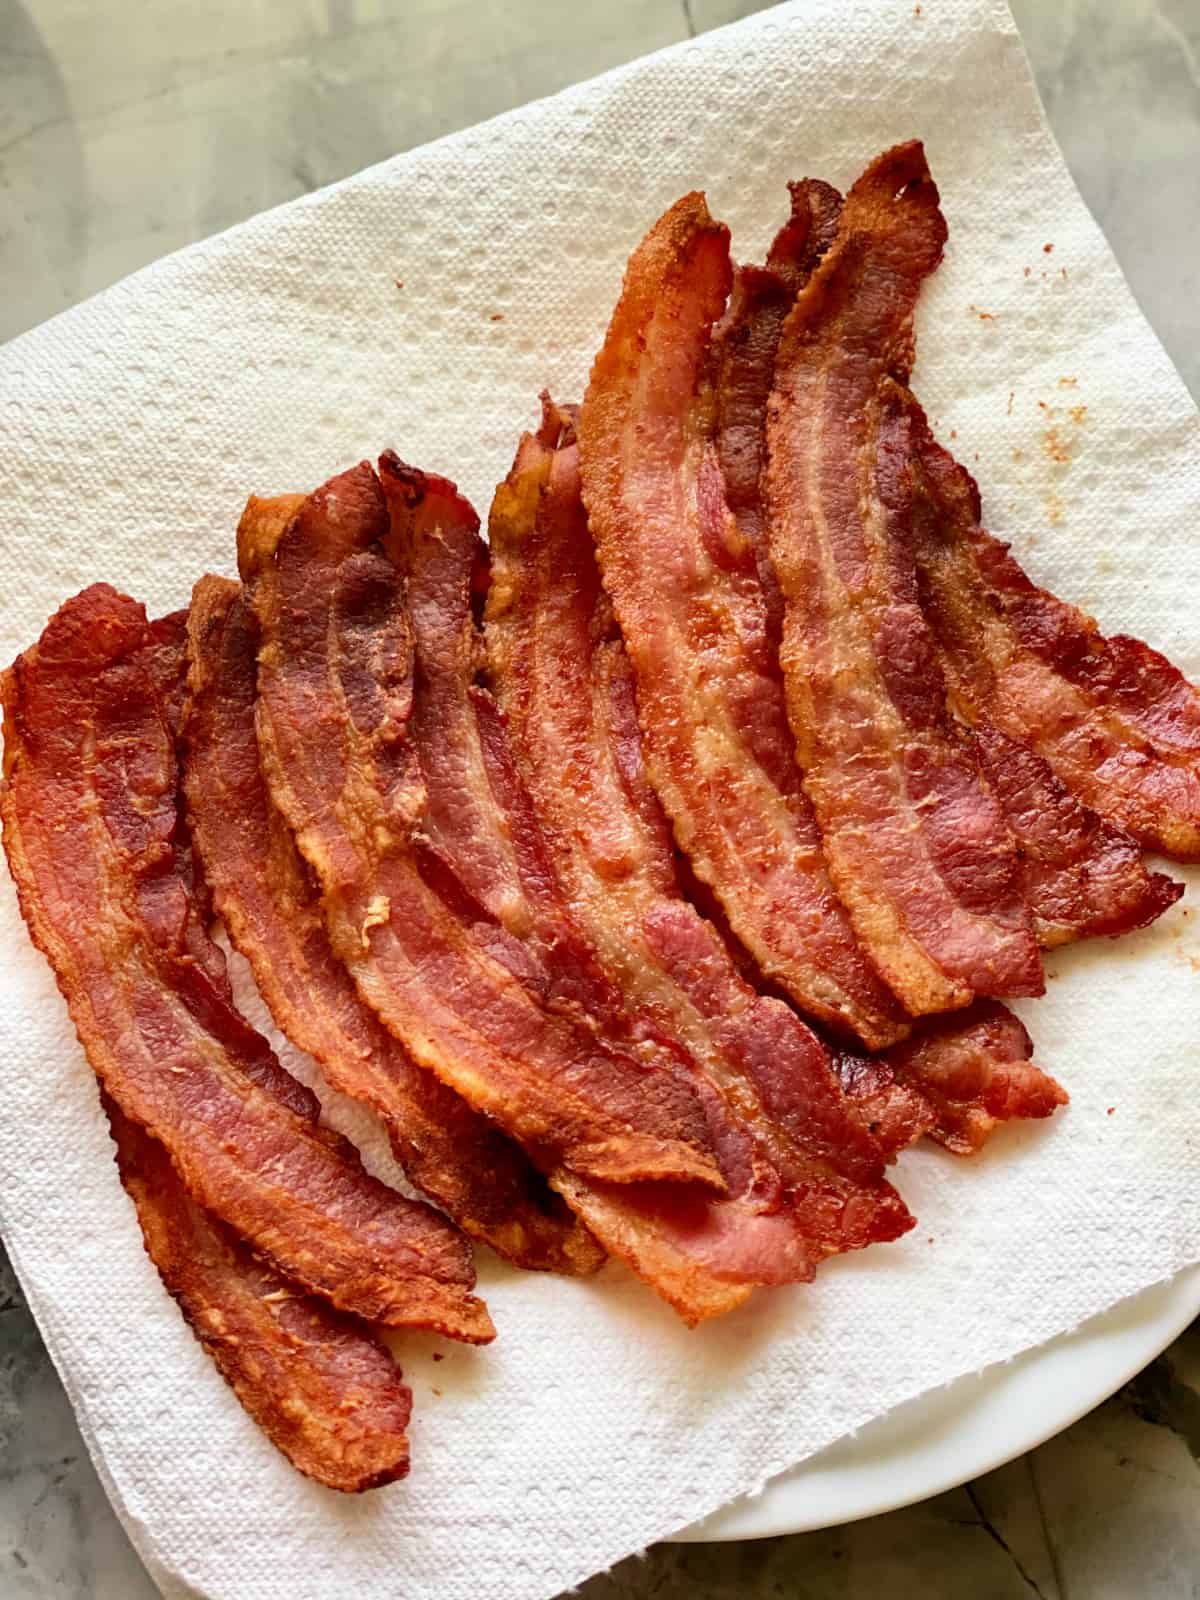 Eleven cooked slices of bacon resting on paper towel